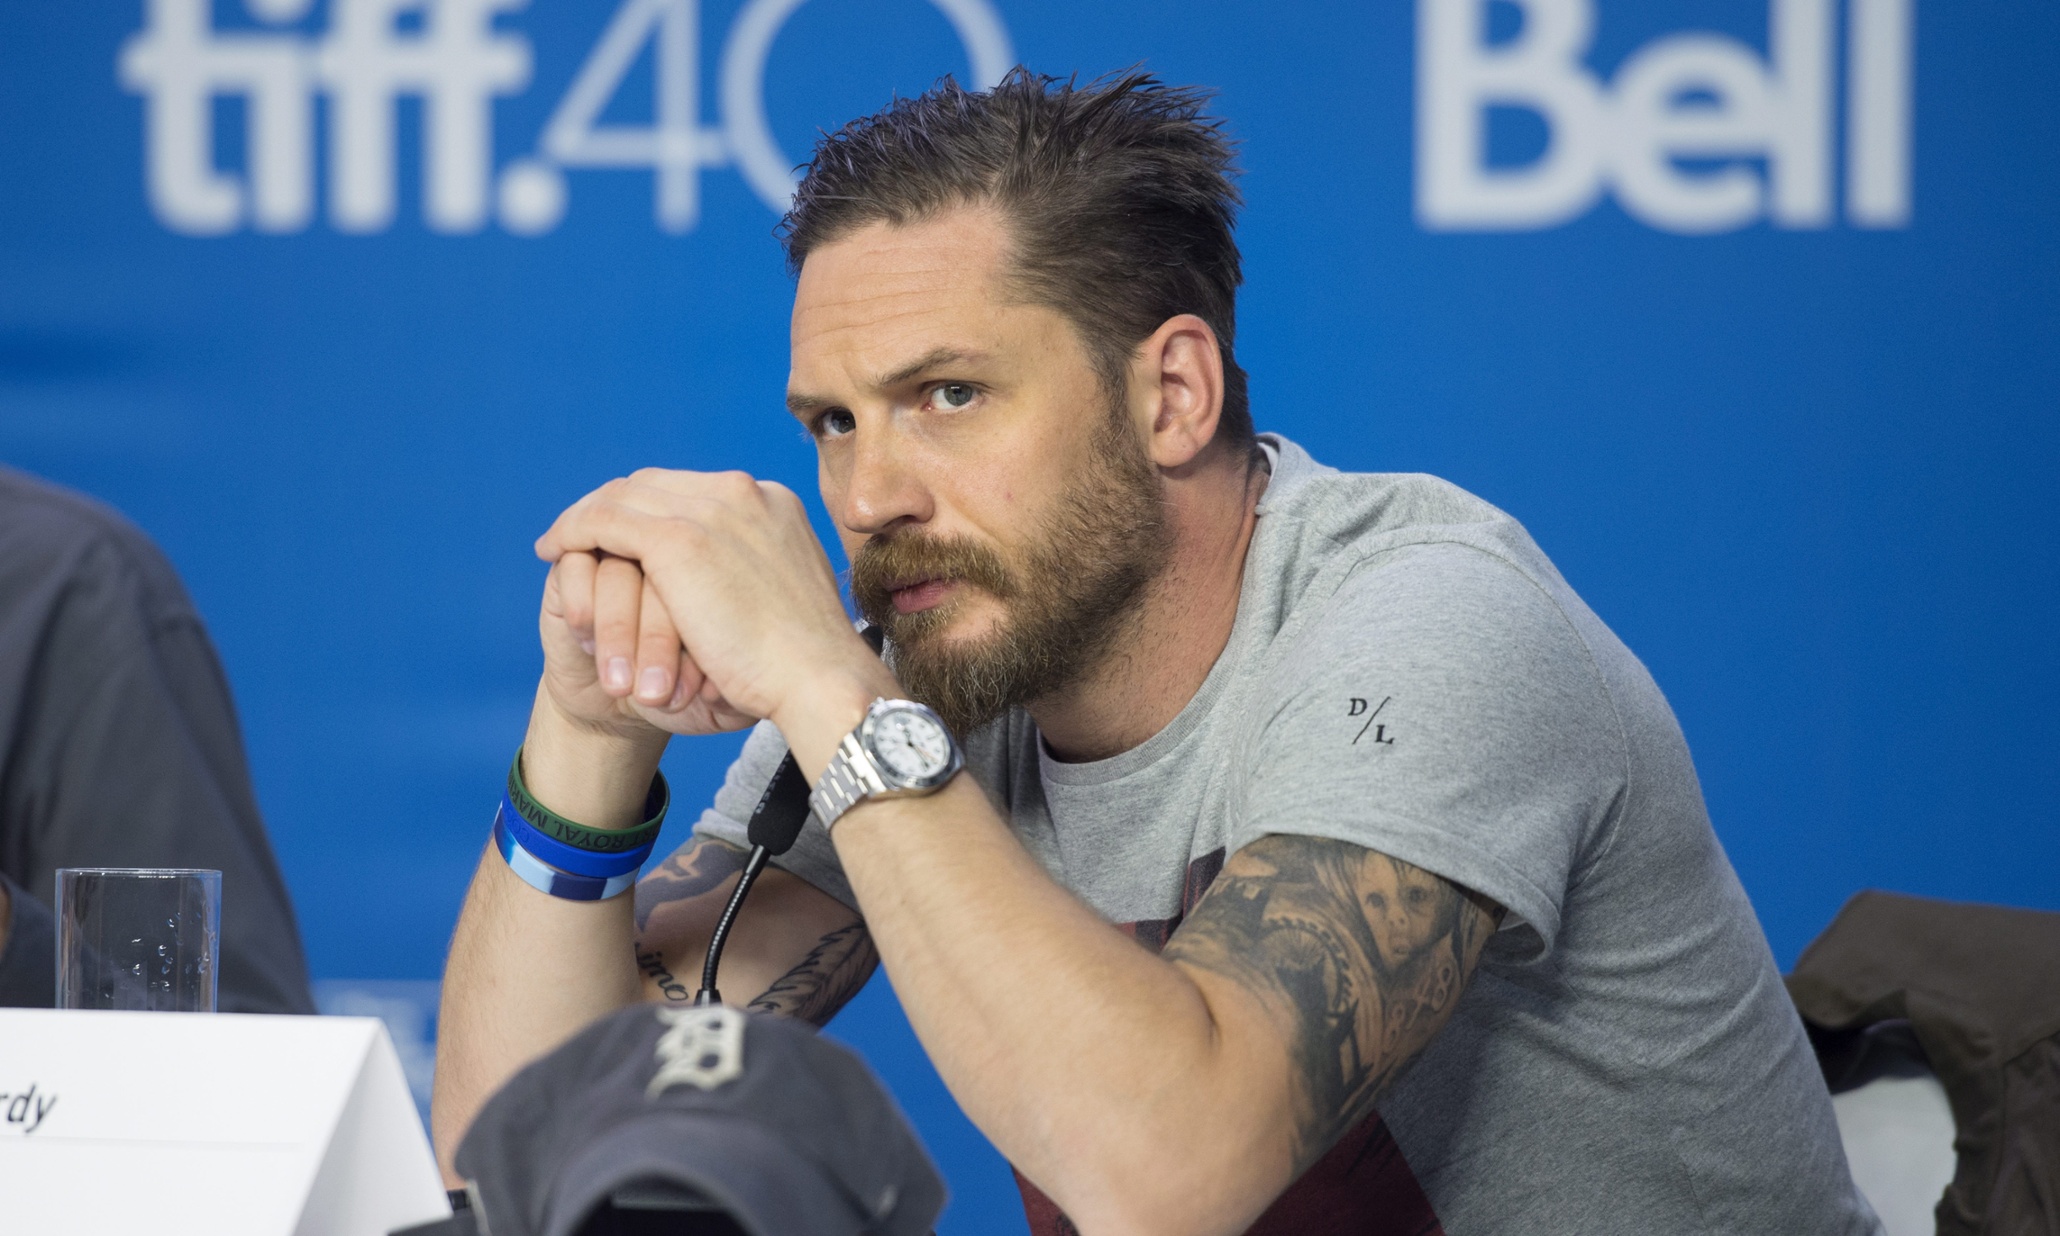 Actor Tom Hardy listens during a press conference promoting the film "Legend" during the 2015 Toronto International Film Festival in Toronto on Sunday, Sept. 13, 2015. (Darren Calabrese/The Canadian Press via AP)